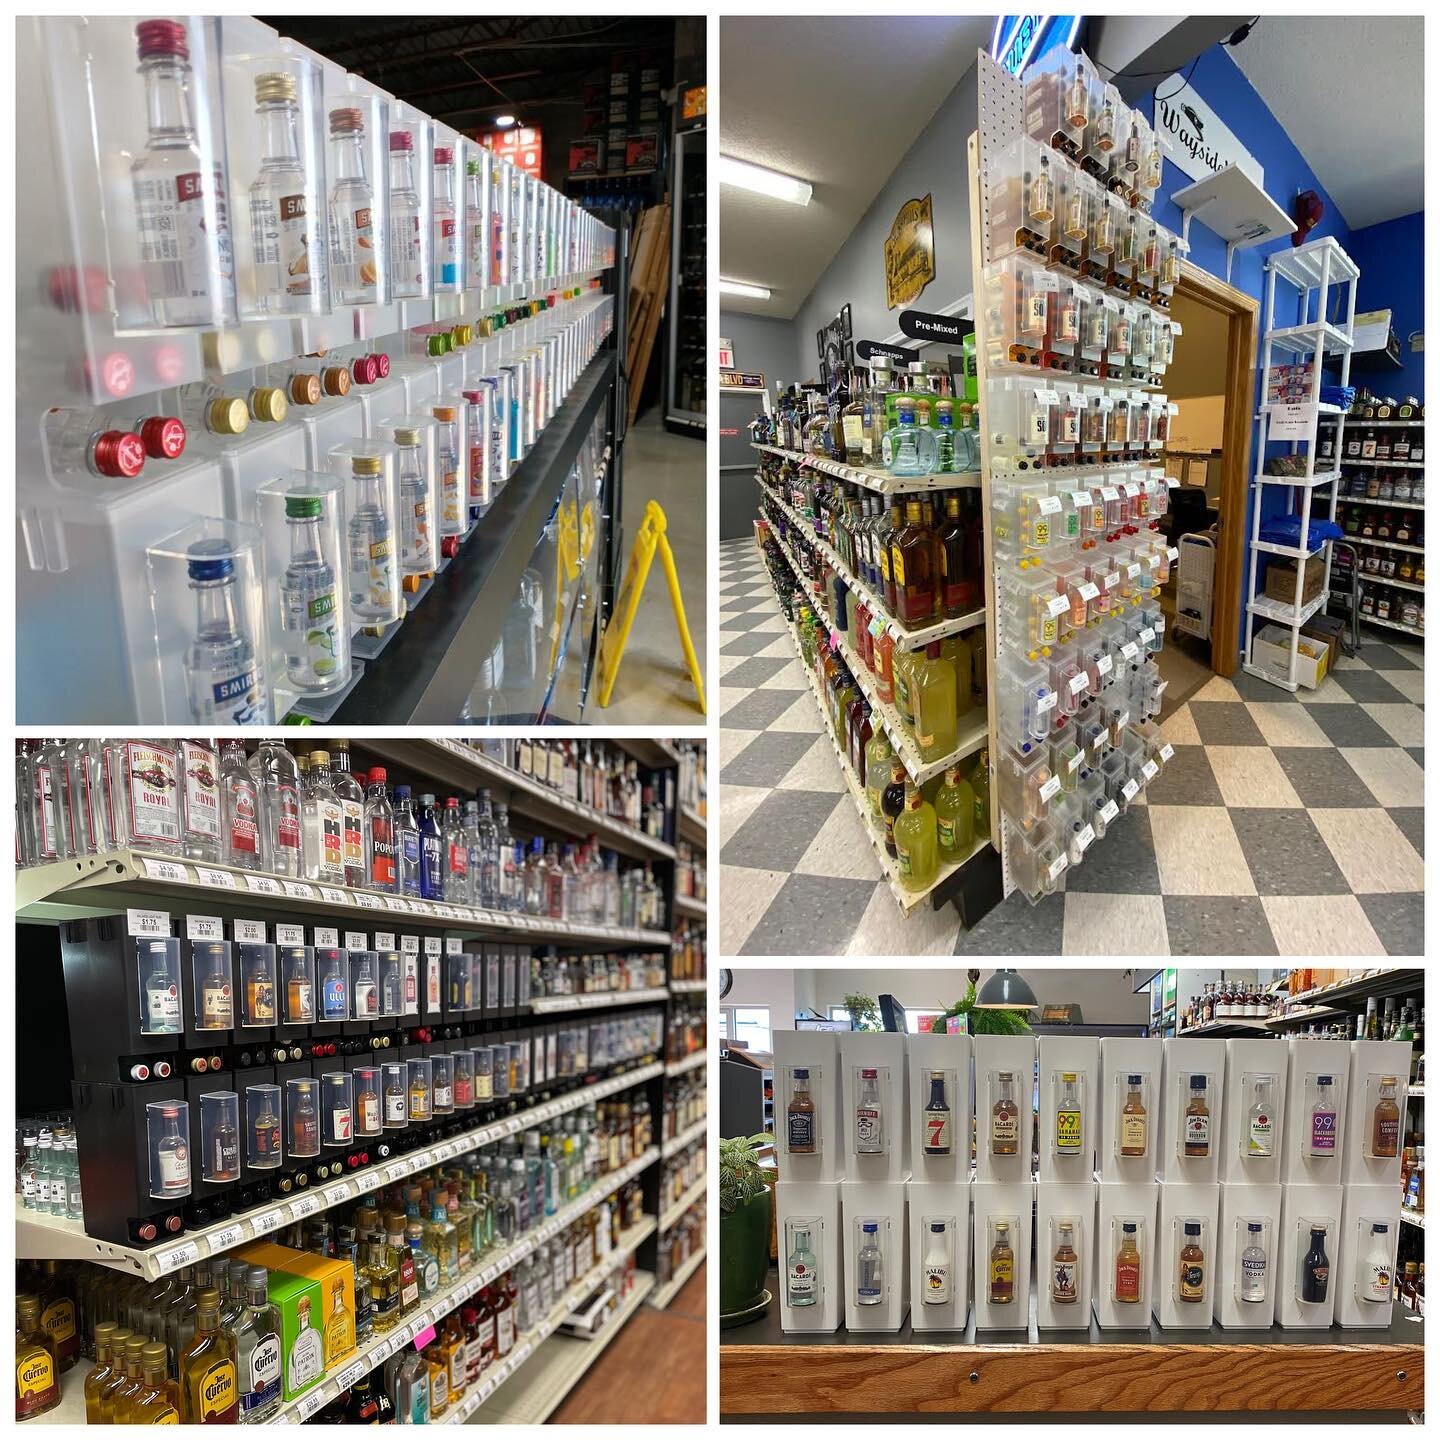 Counter - Shelf - Wall 
Shooter Displays has it all!!